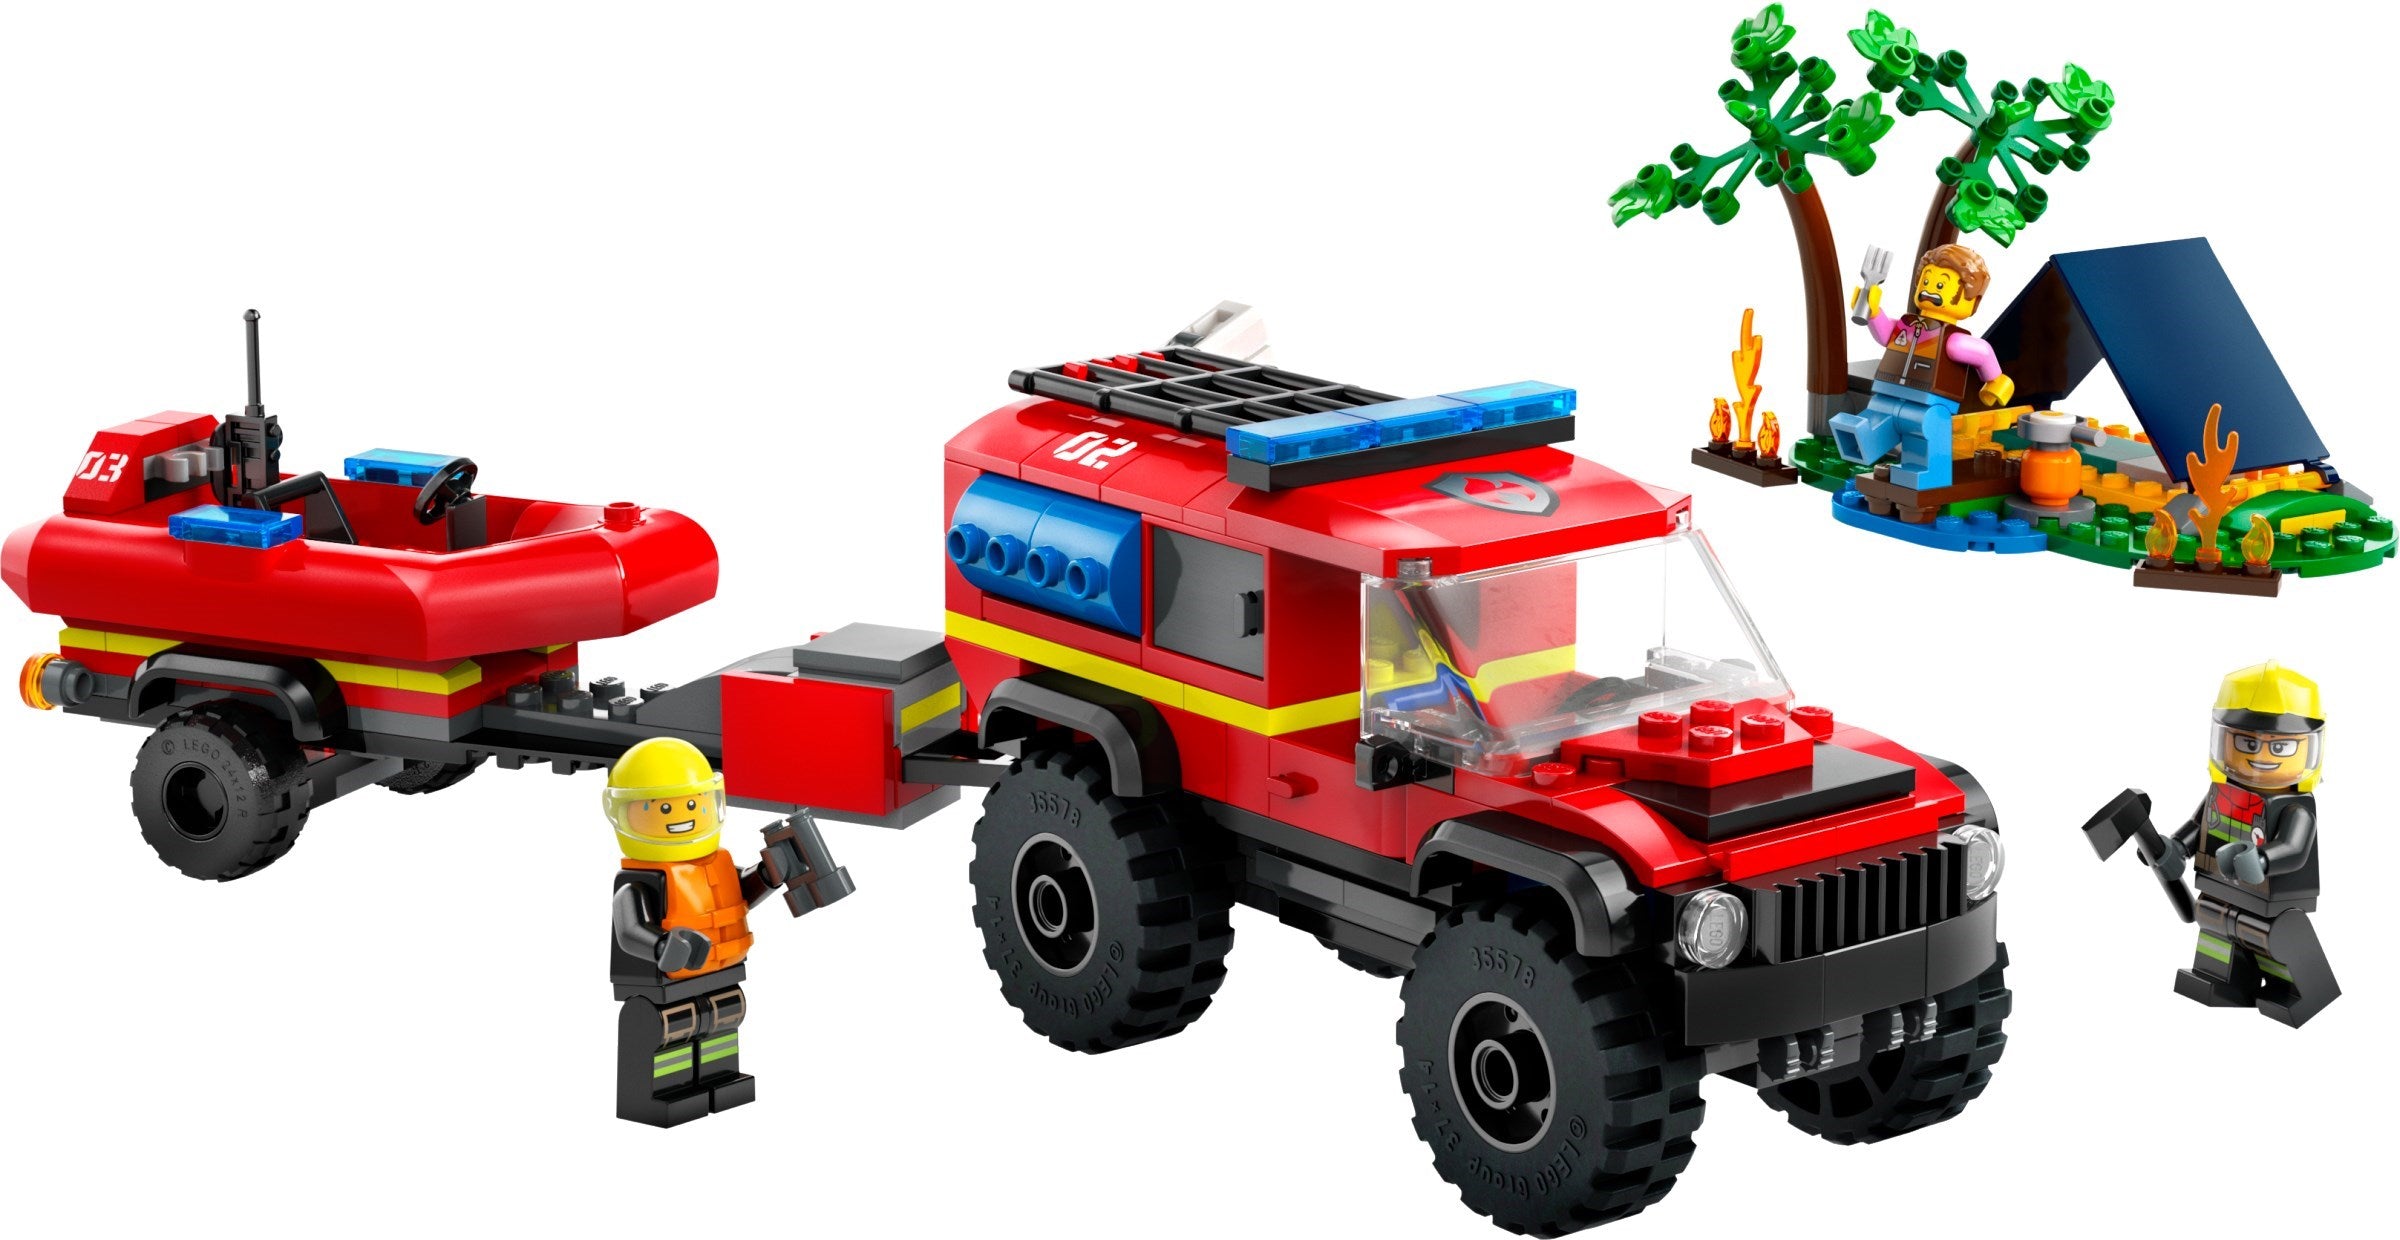 LEGO 60412 4x4 Fire Truck with Rescue Boat